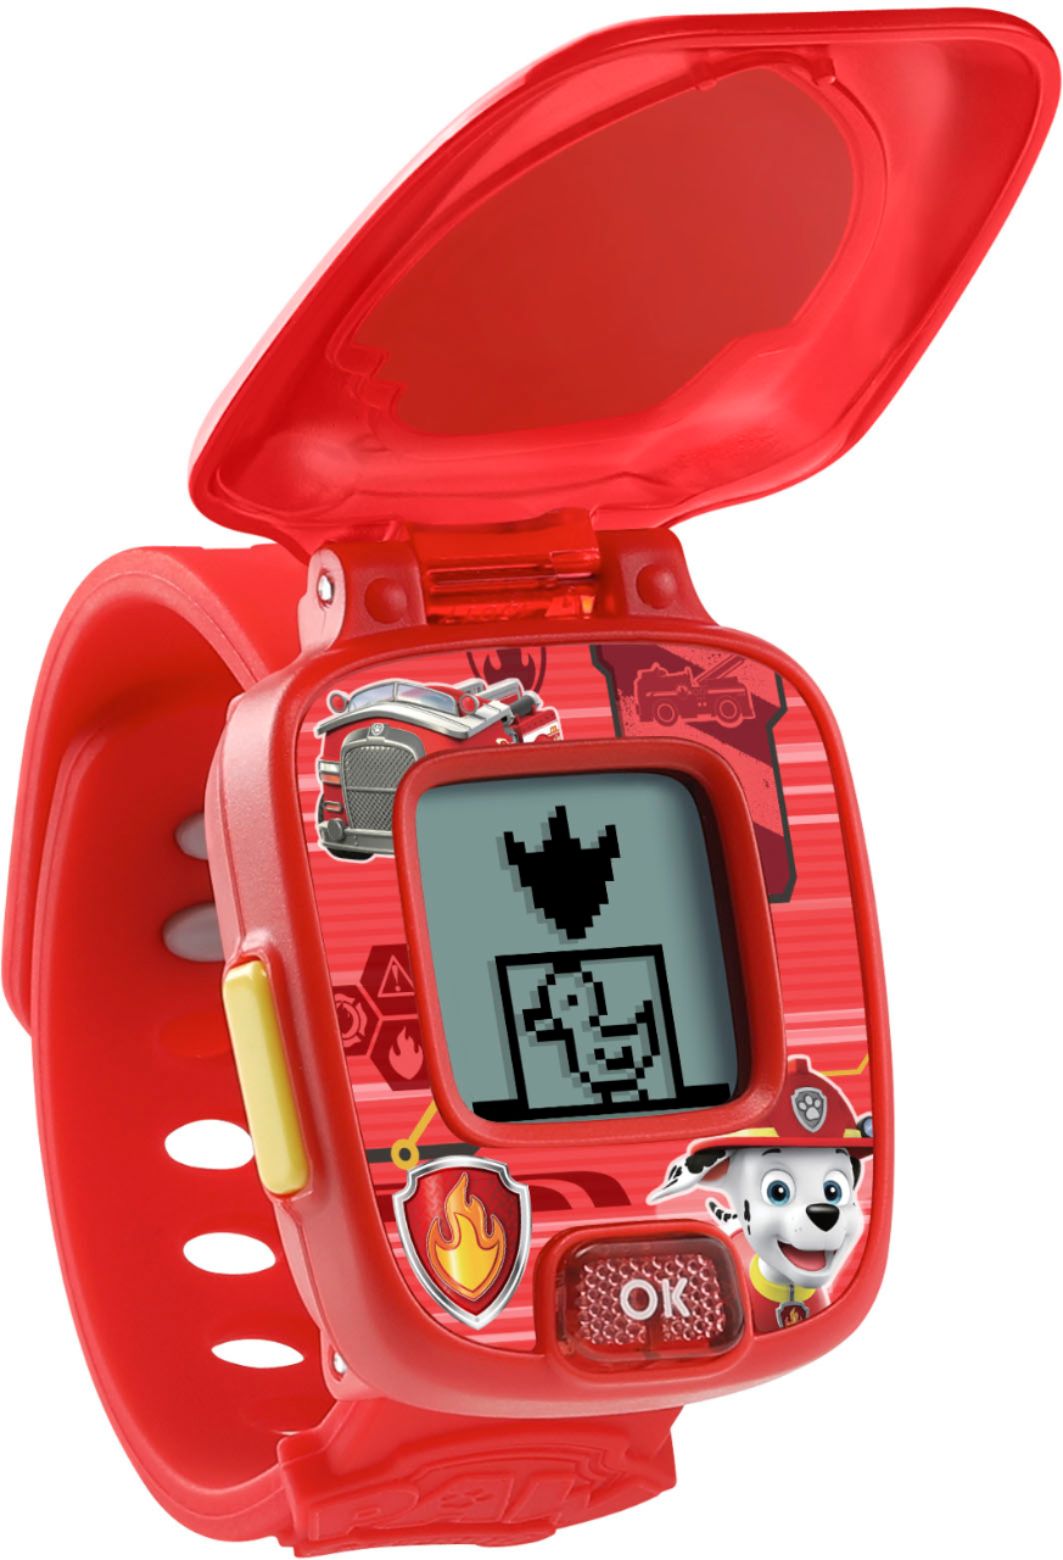 Angle View: VTech - PAW Patrol Marshall Learning Watch - Red